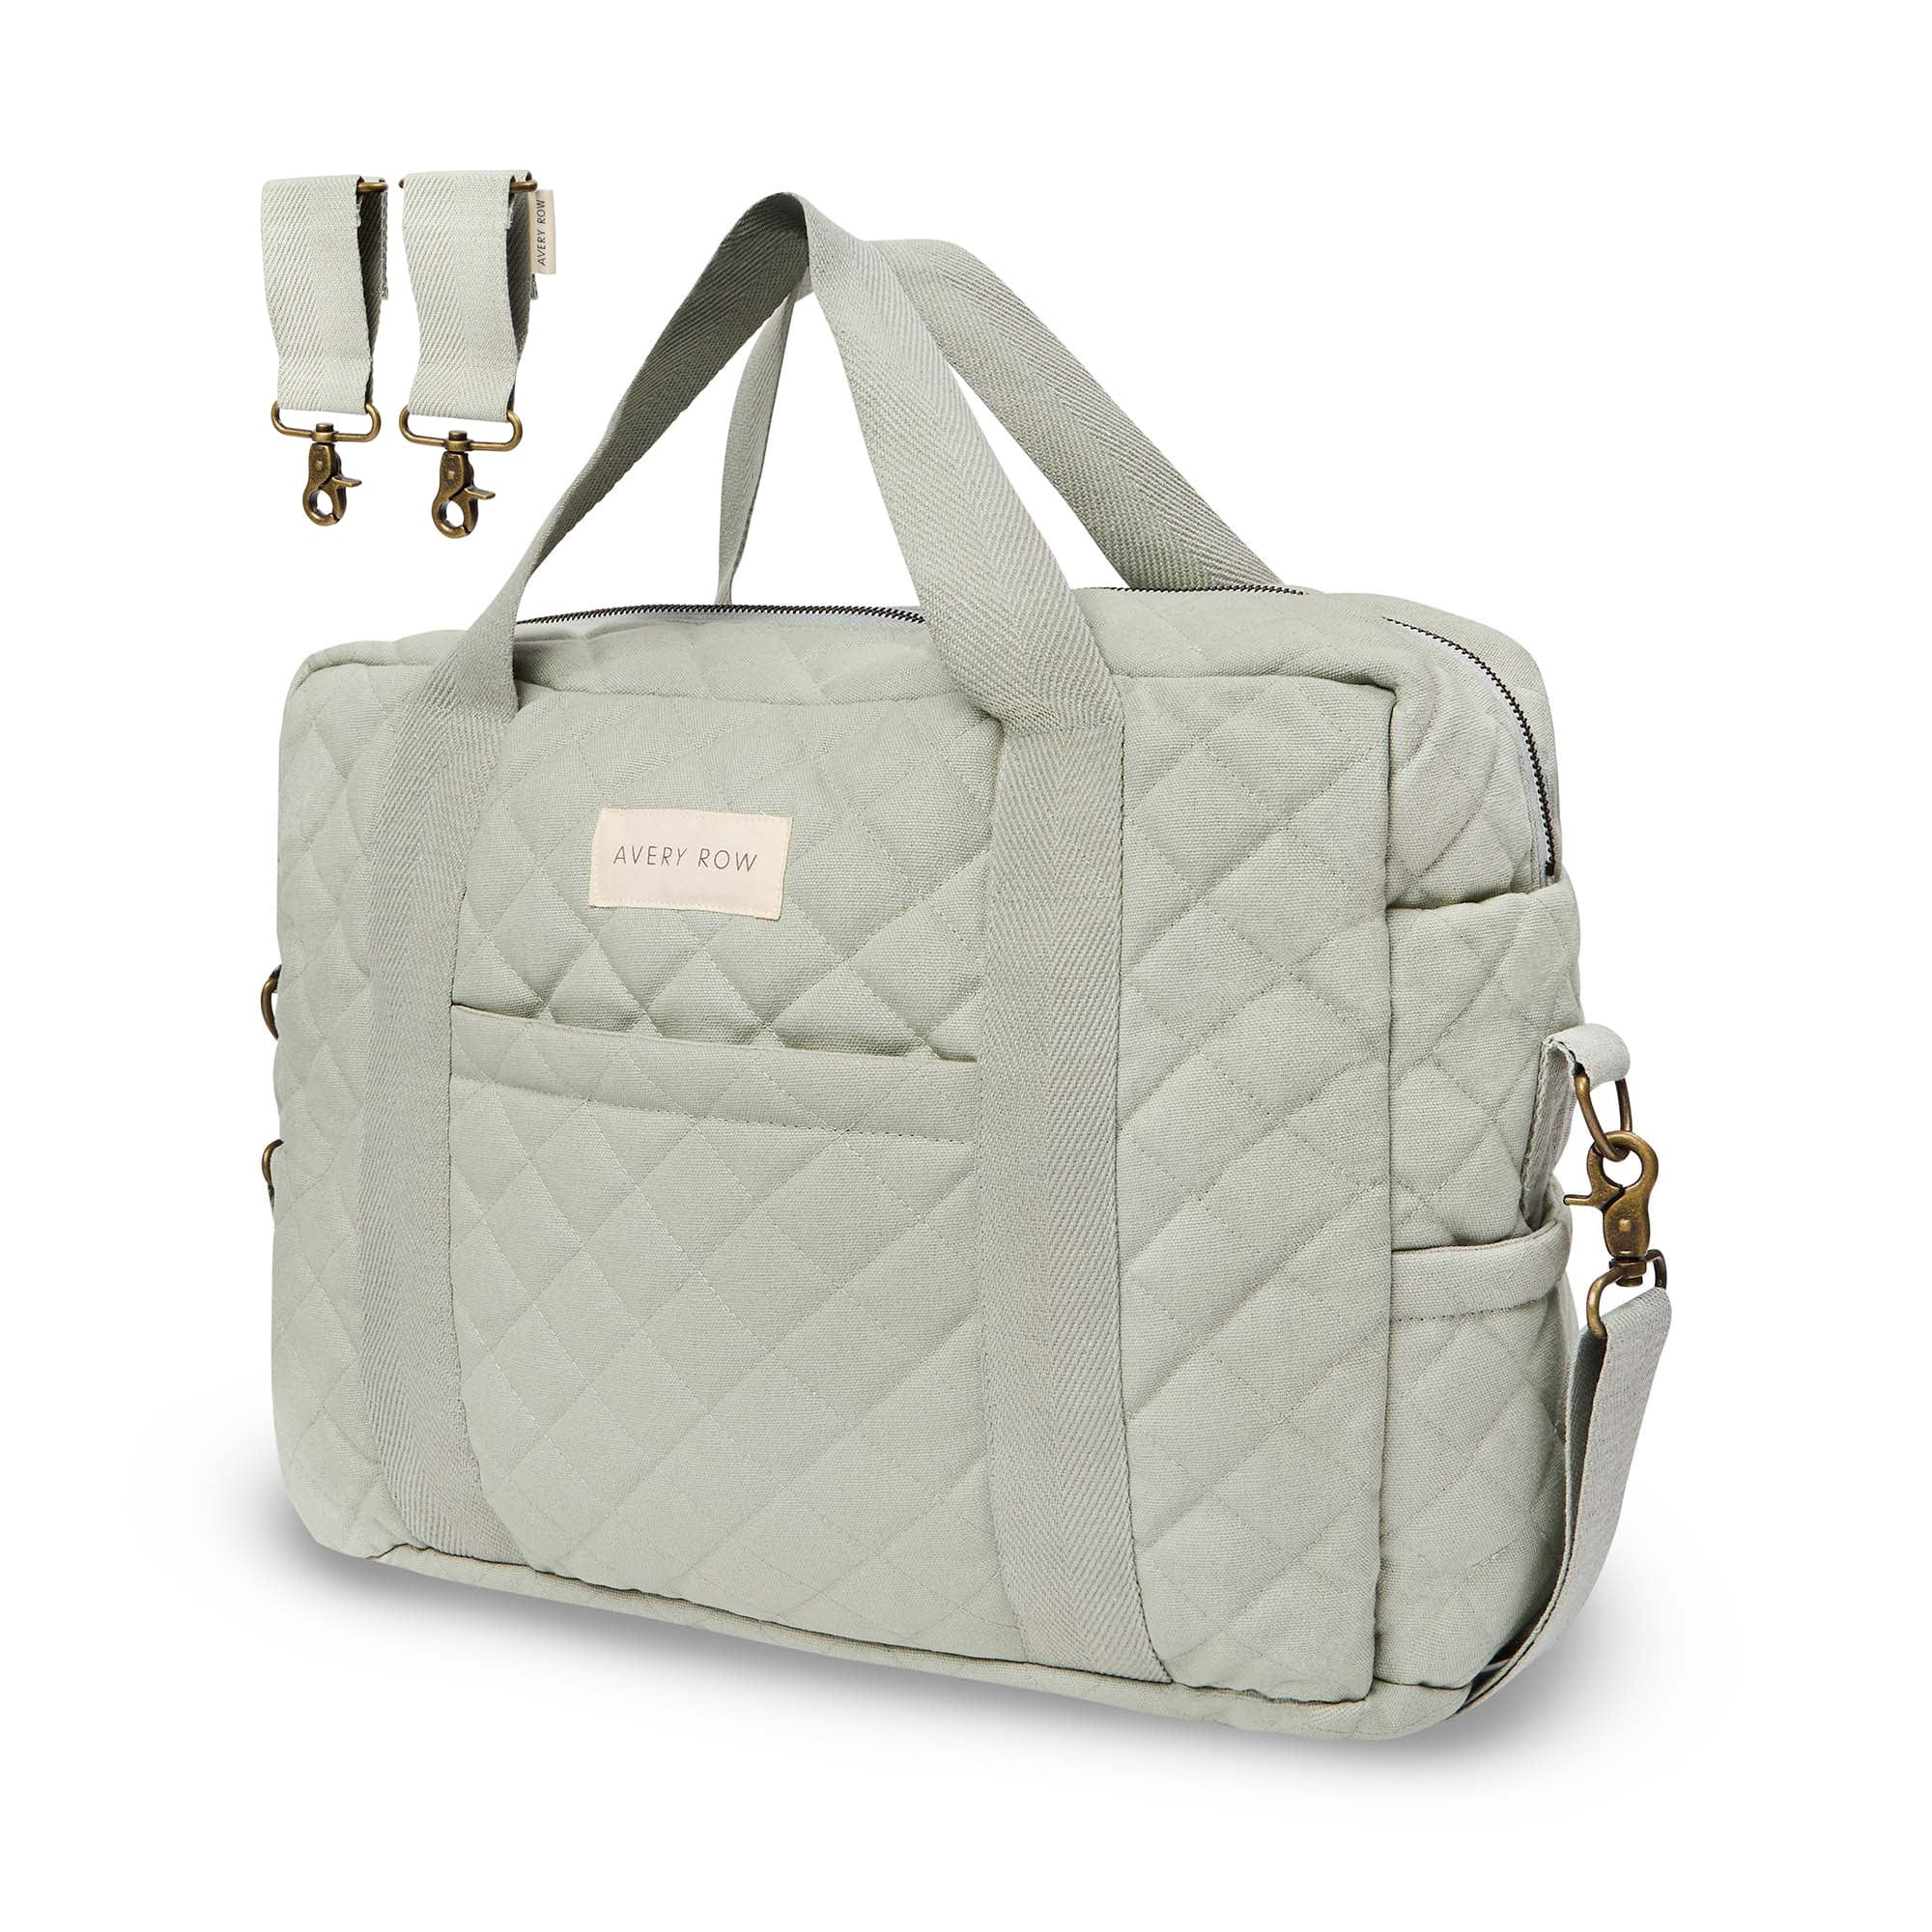 Avery Row Changing Bag Avery Row Baby Changing Bag (Sage)